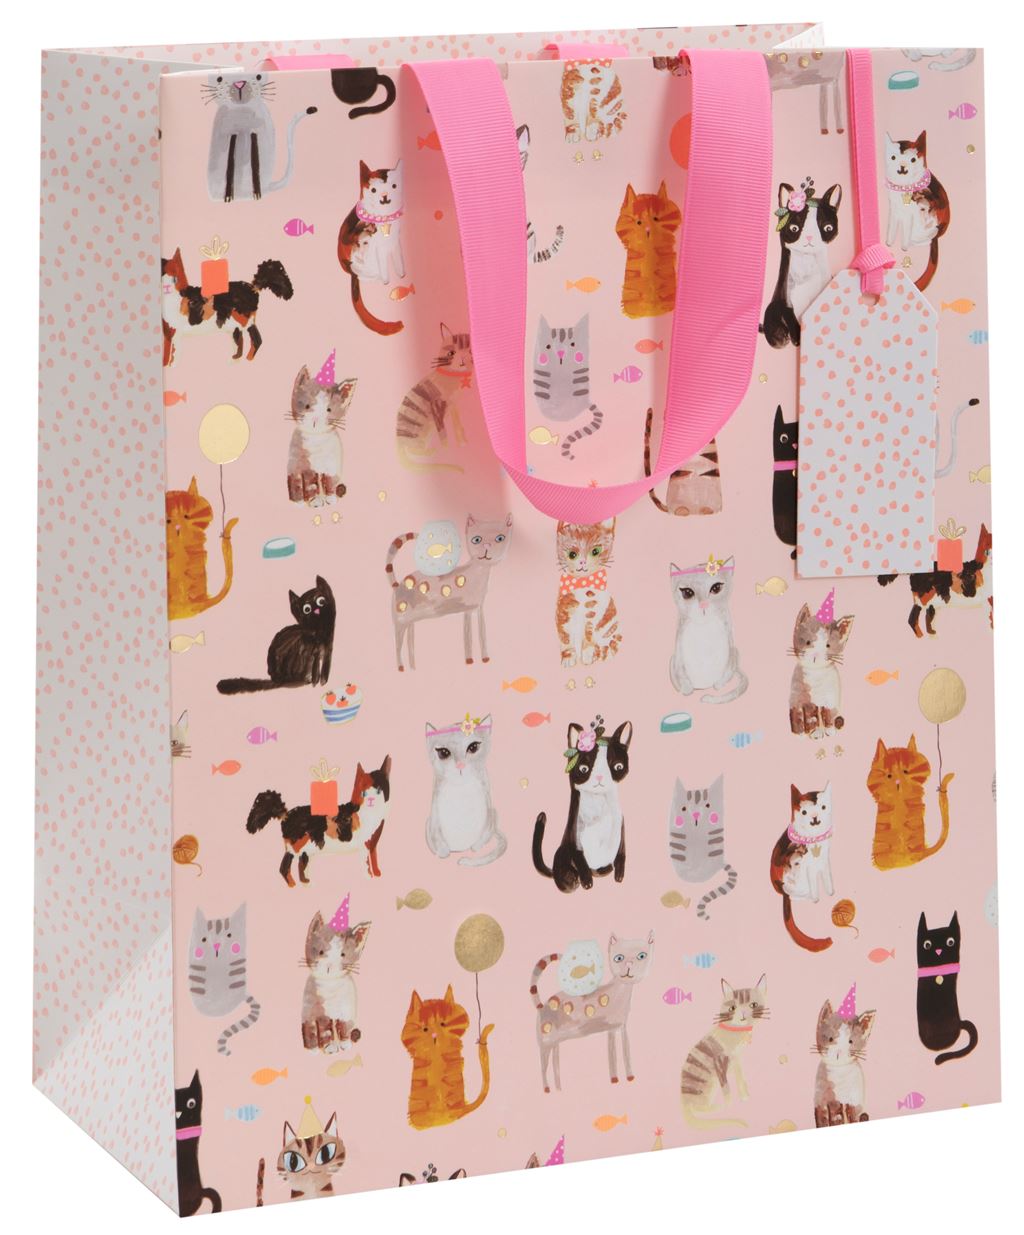 A gift bag with a light pink background covered in illustrations of cats - some with party hats, balloons and gifts. The sides and tag of the bag have a white background and small pink spots. There is a cerise pink ribbon handle.